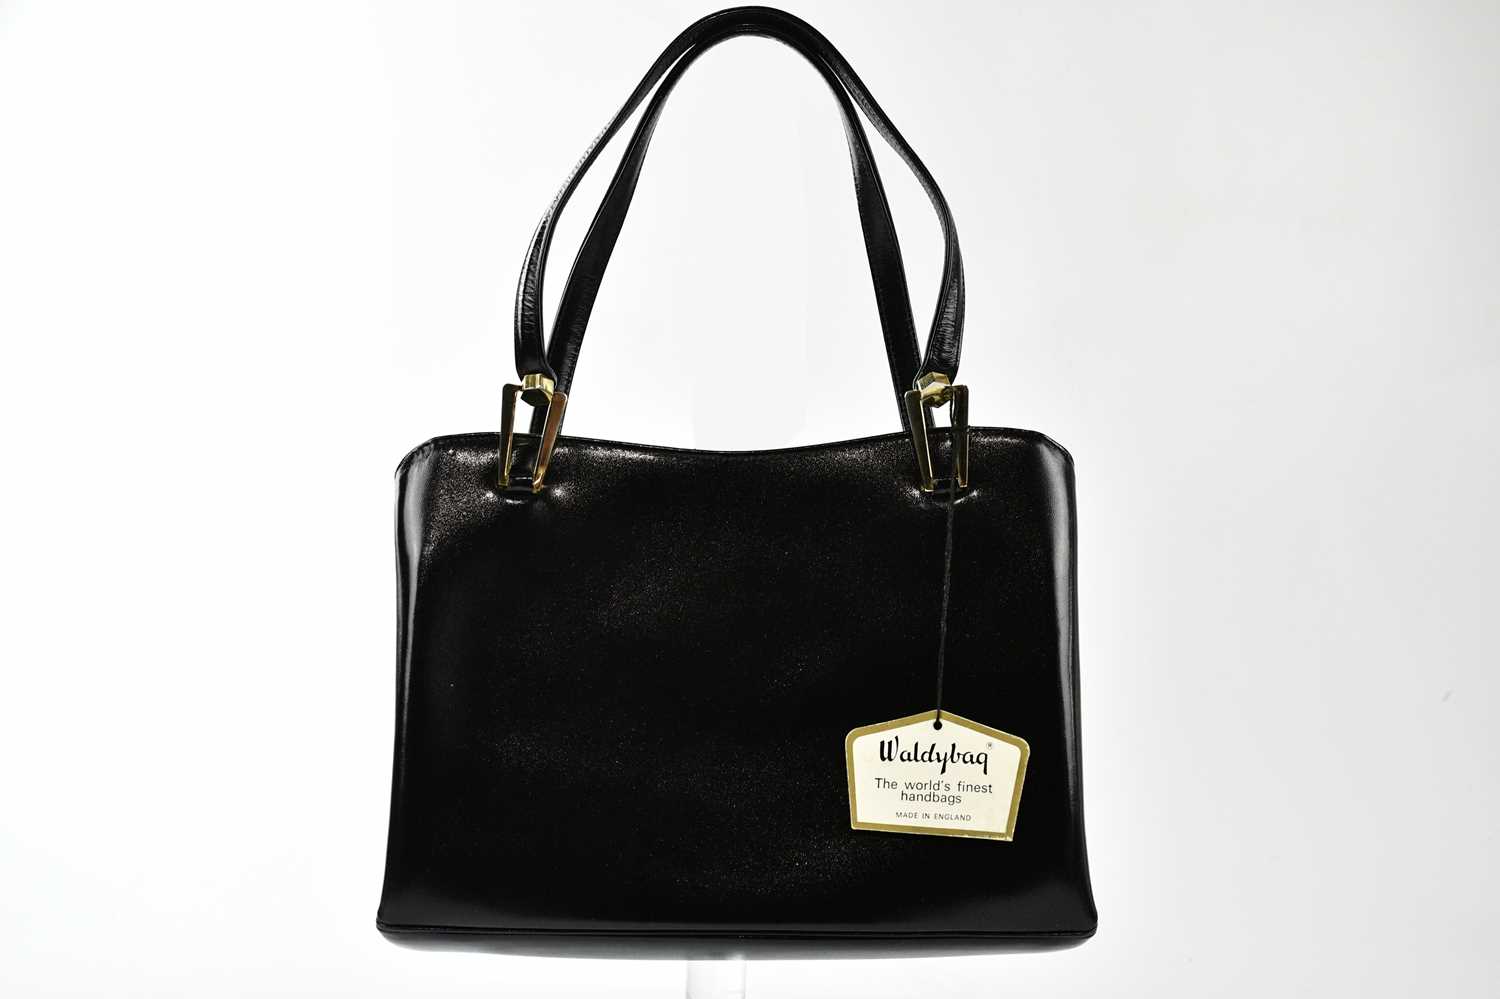 WALDYBAG; a 1950s unused and boxed black leather handbag with gold tone hardware, beige suede